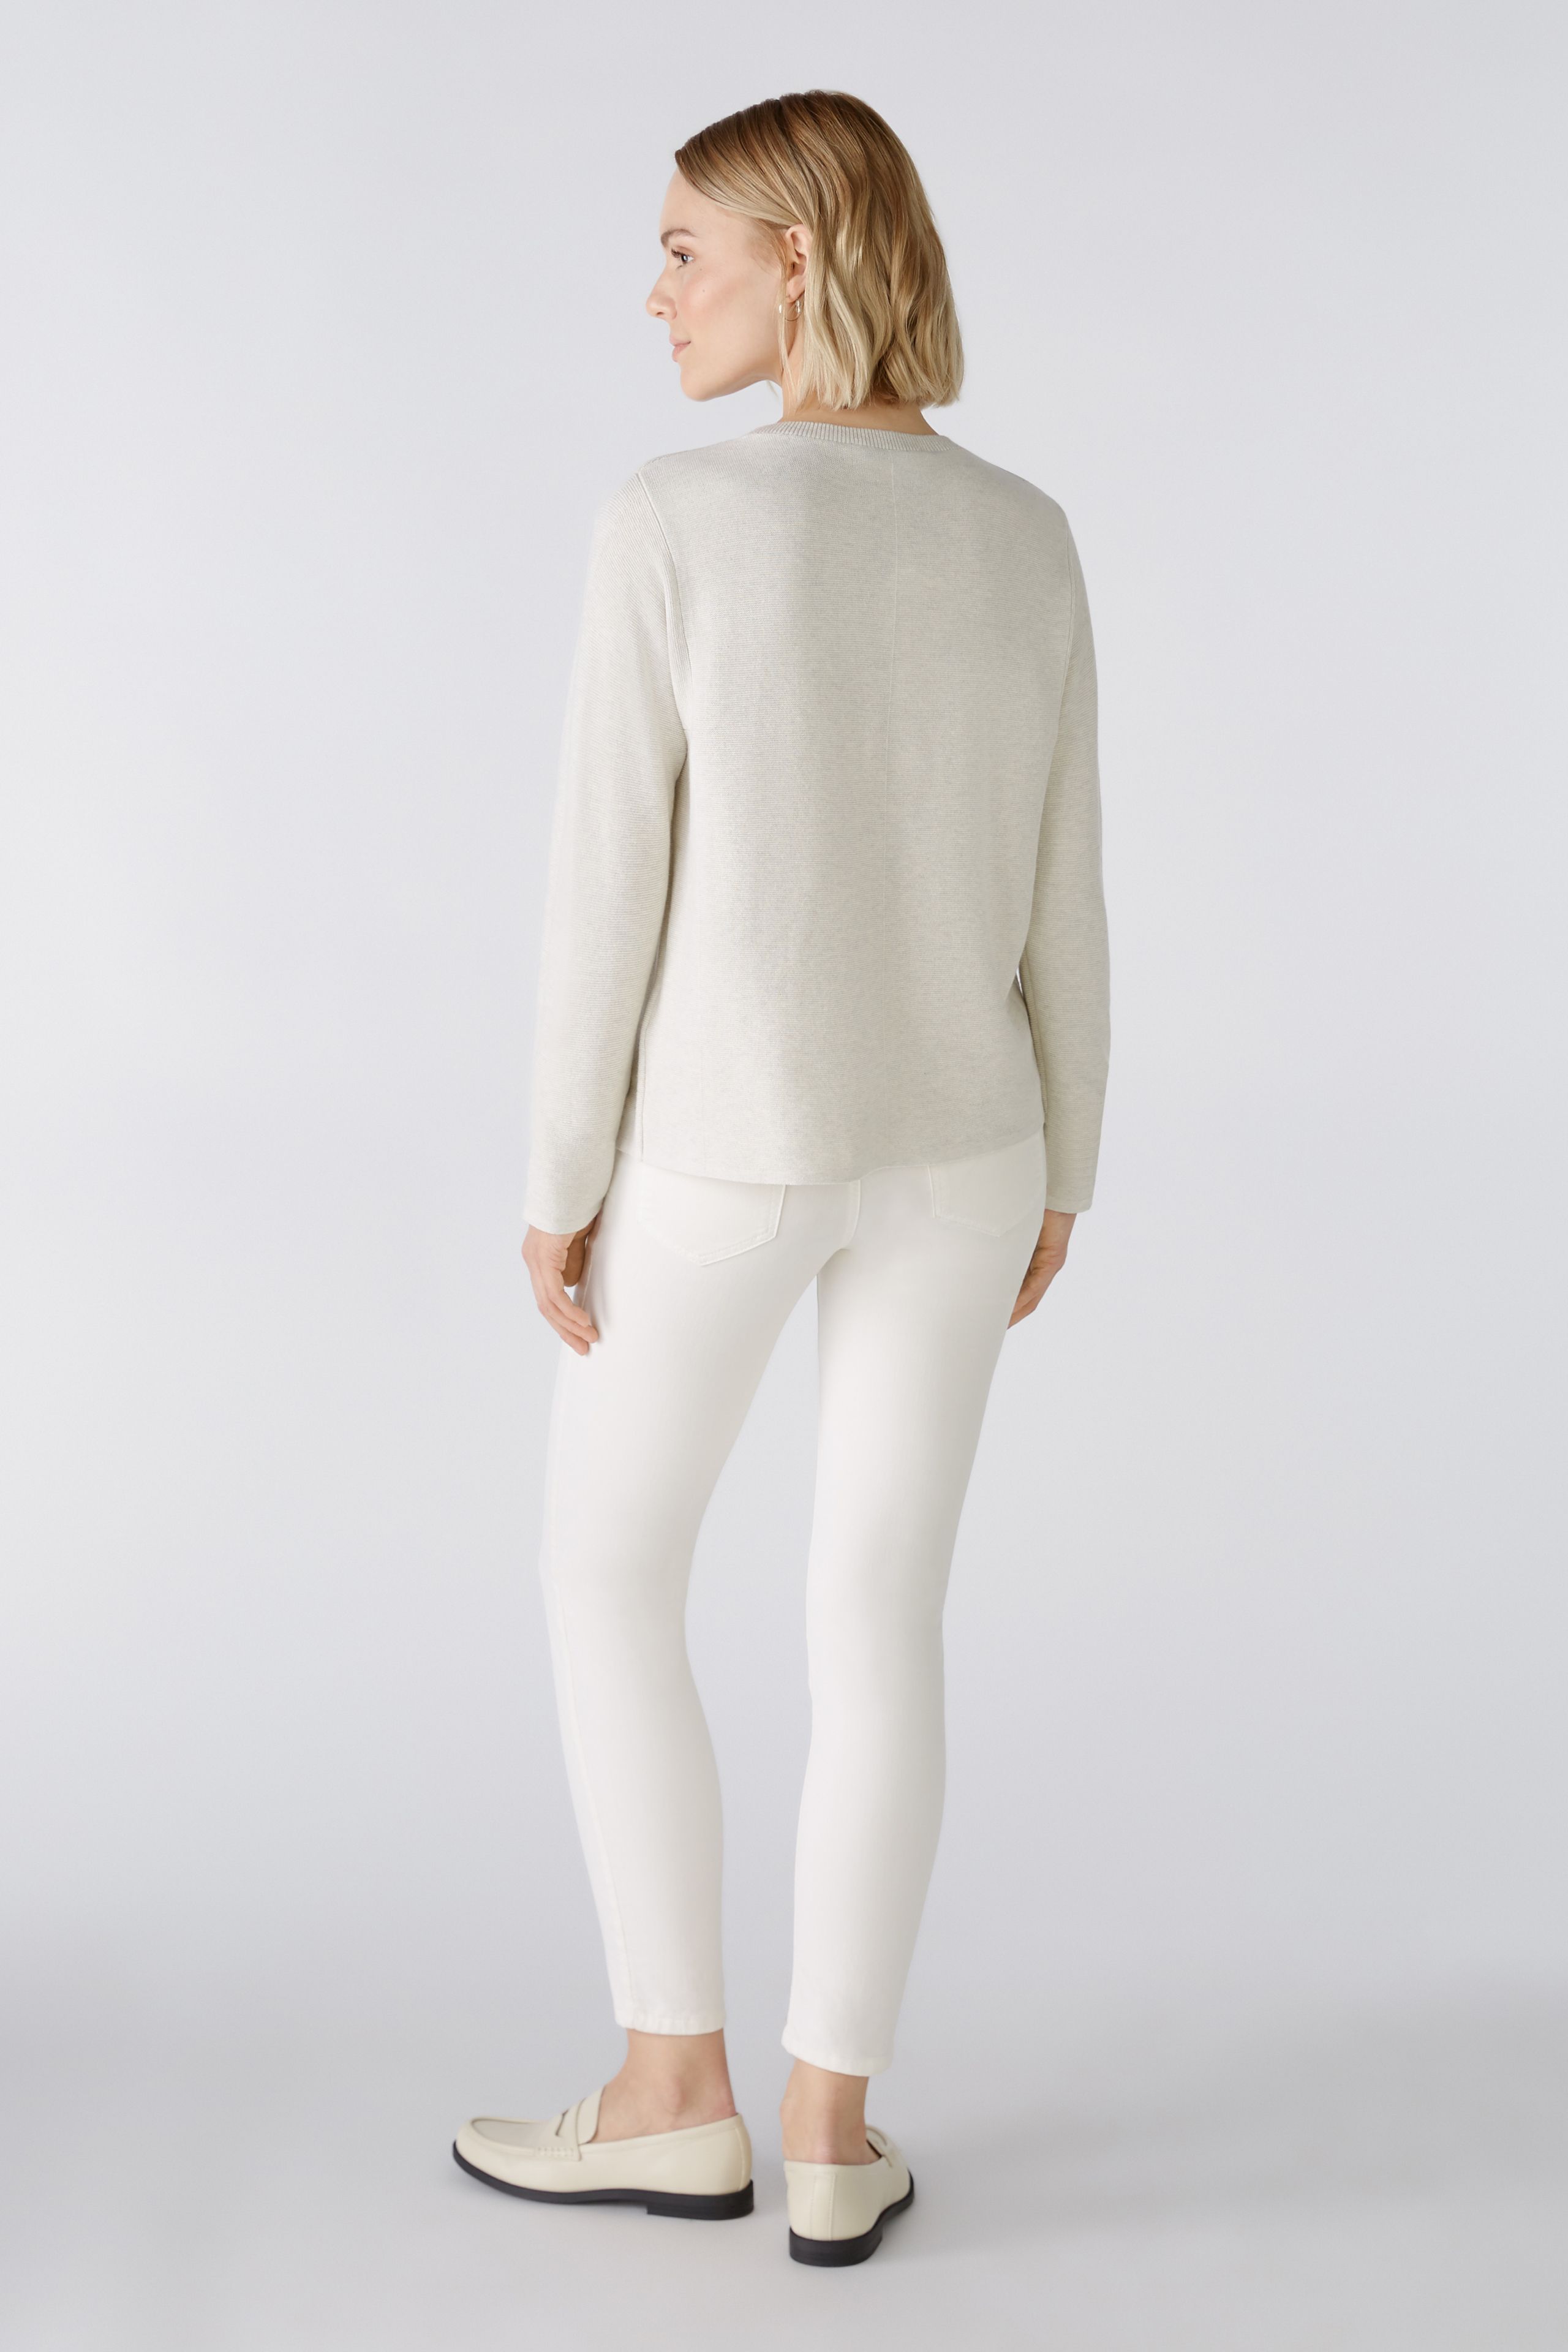 Oui Pocket Detail Pullover Sweater